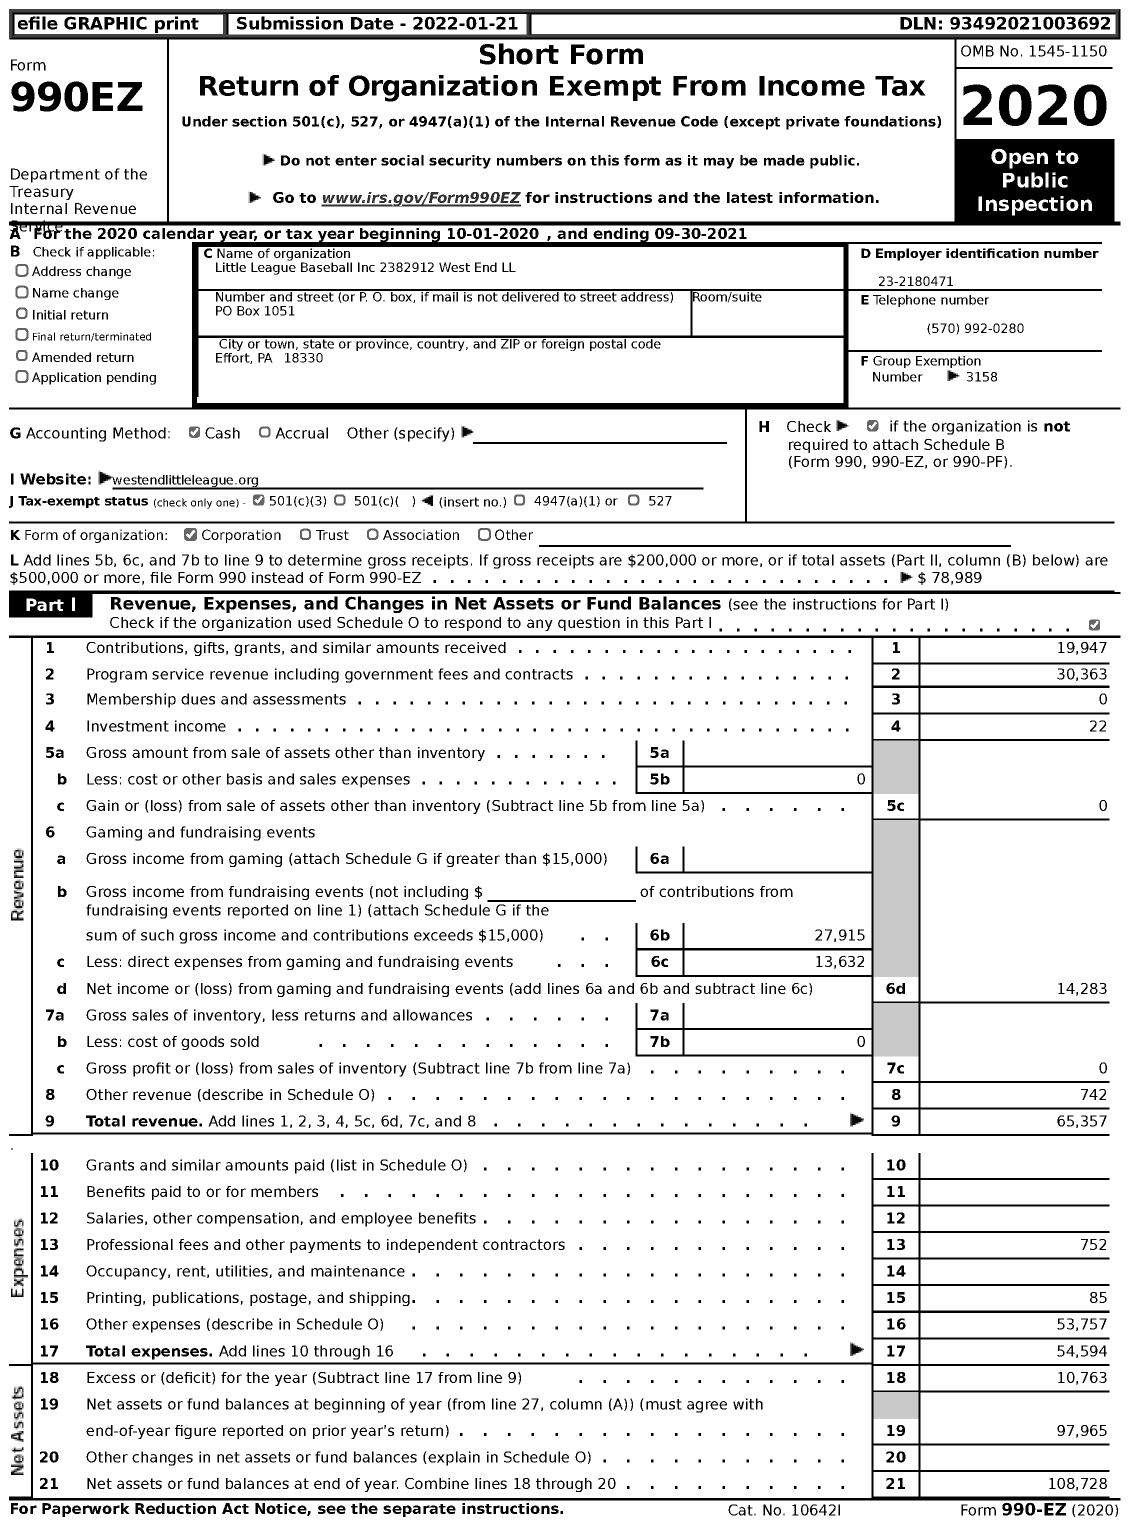 Image of first page of 2020 Form 990EZ for Little League Baseball 2382912 West End LL